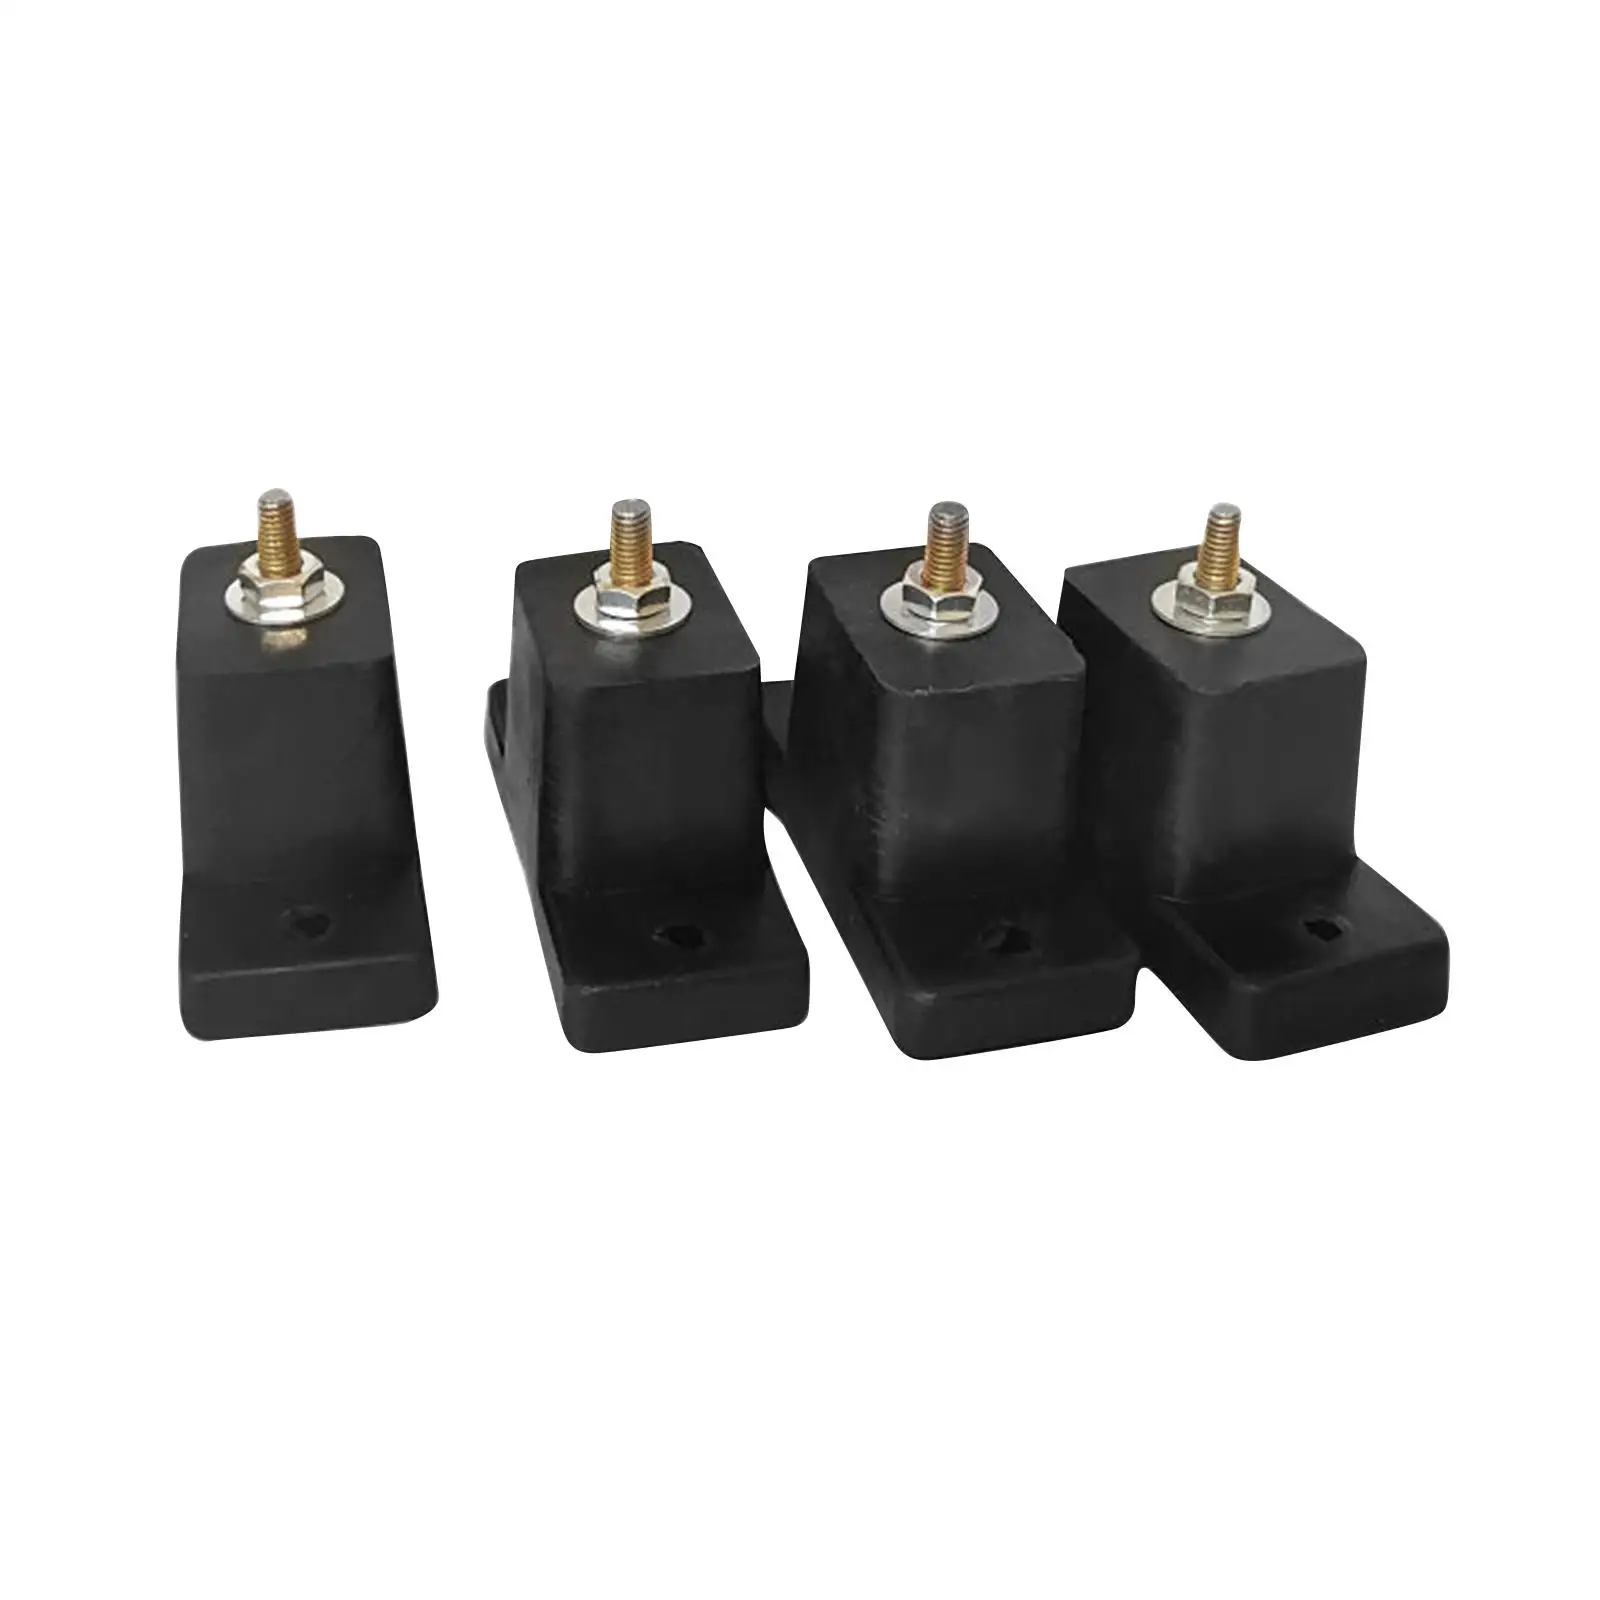 4Pcs Anti Vibration Pad Rubber Mount for Roofs Air Conditioner Outdoor Unit